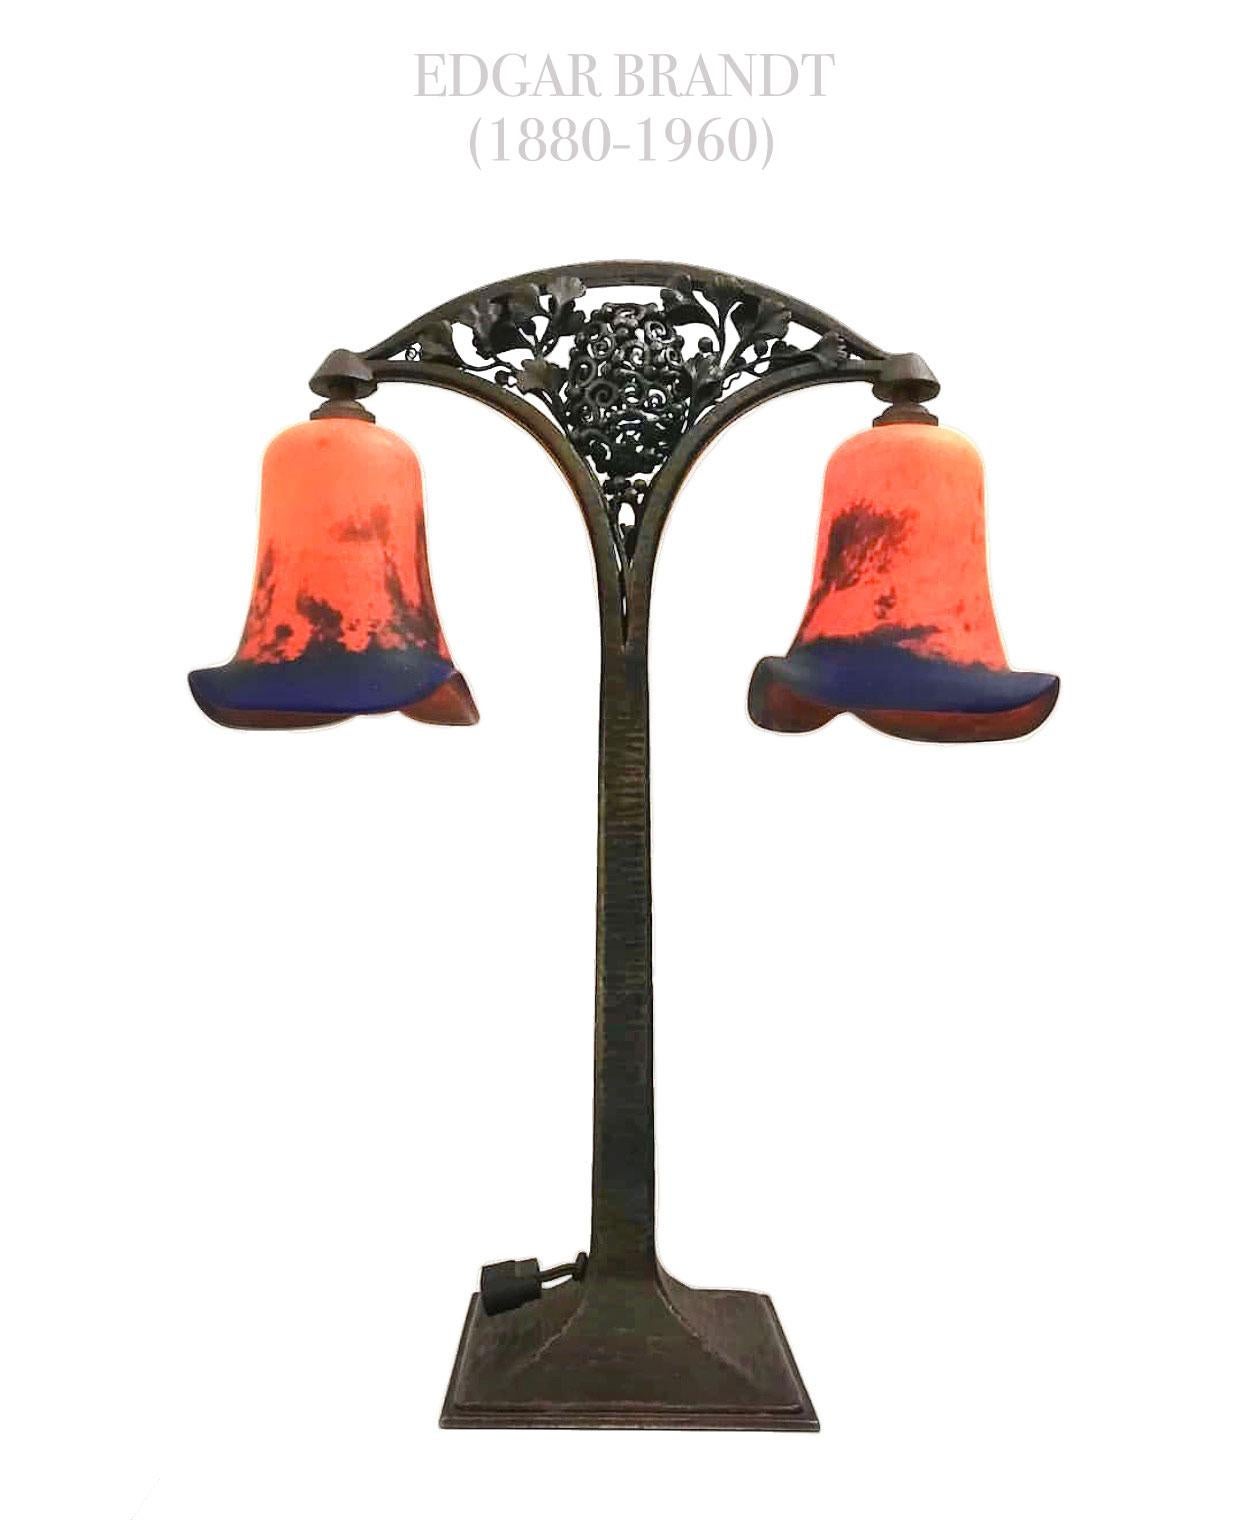 1920s Edgar Brandt wrought iron & daum glass table lamp

Wrought iron and glass
Measures: 19 1/4 x 15 3/4 x 6 1/8 in. (48.9 x 40 x 15.6 cm)
circa 1925

Provenance: Sotheby’s 06 March 2013 • New York. Lot 117 Sold for 23,750 USD


Edgar